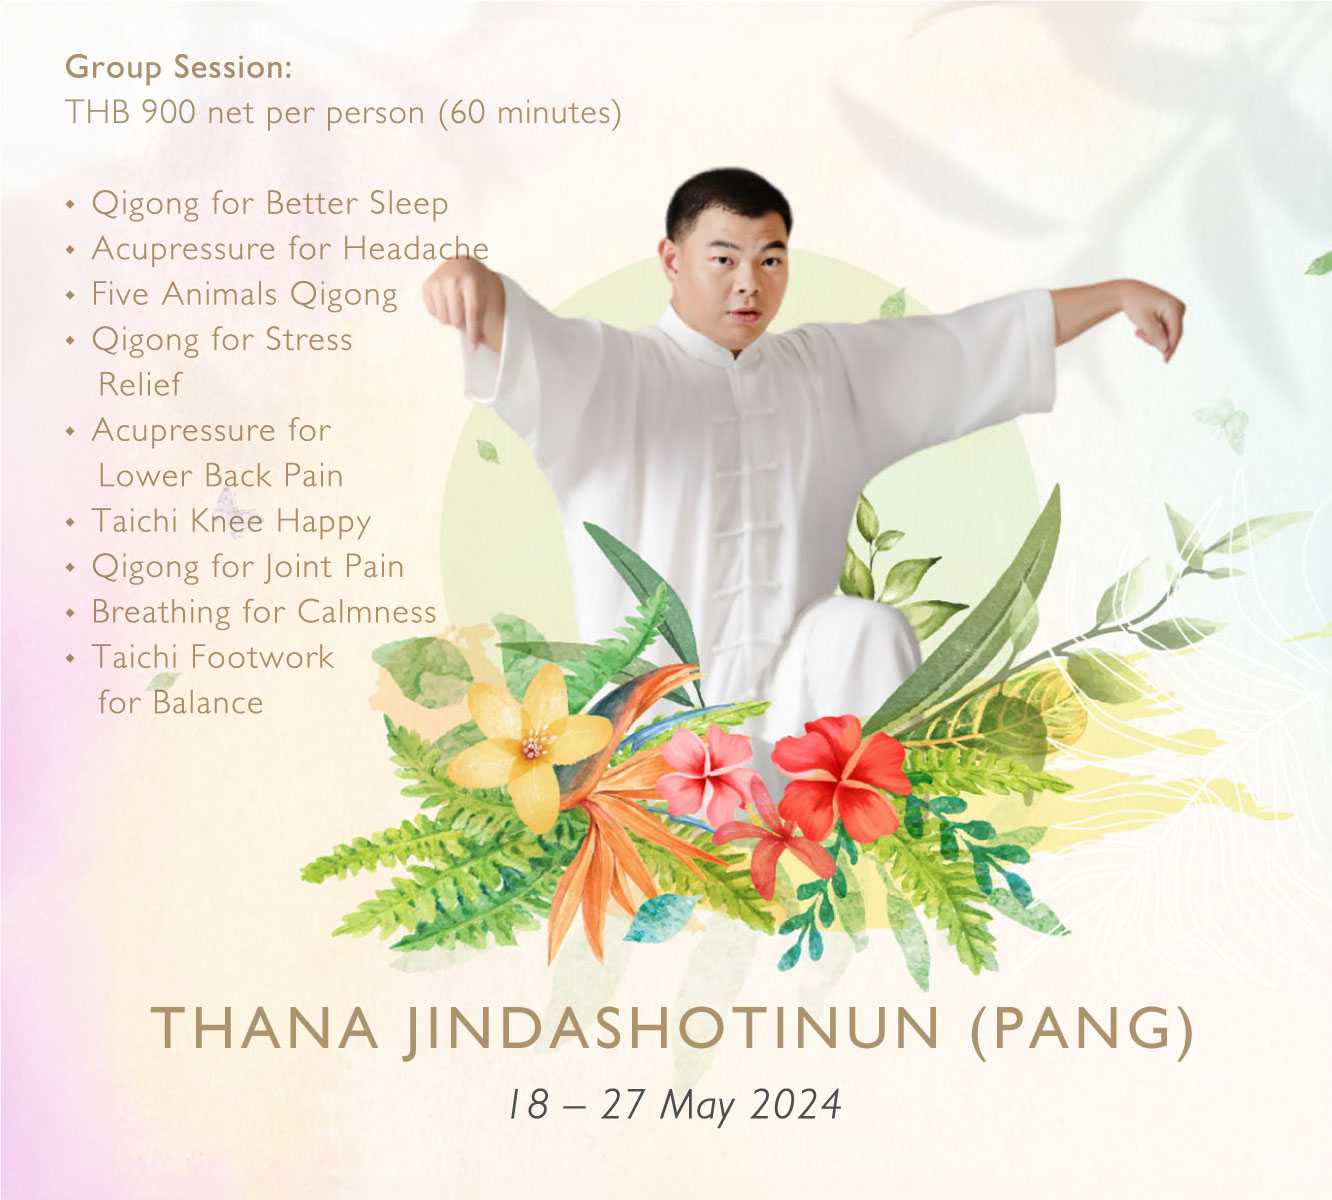 May Practitioner: Harmony Healer by Qigong Master (Group Session) - 60 minutes